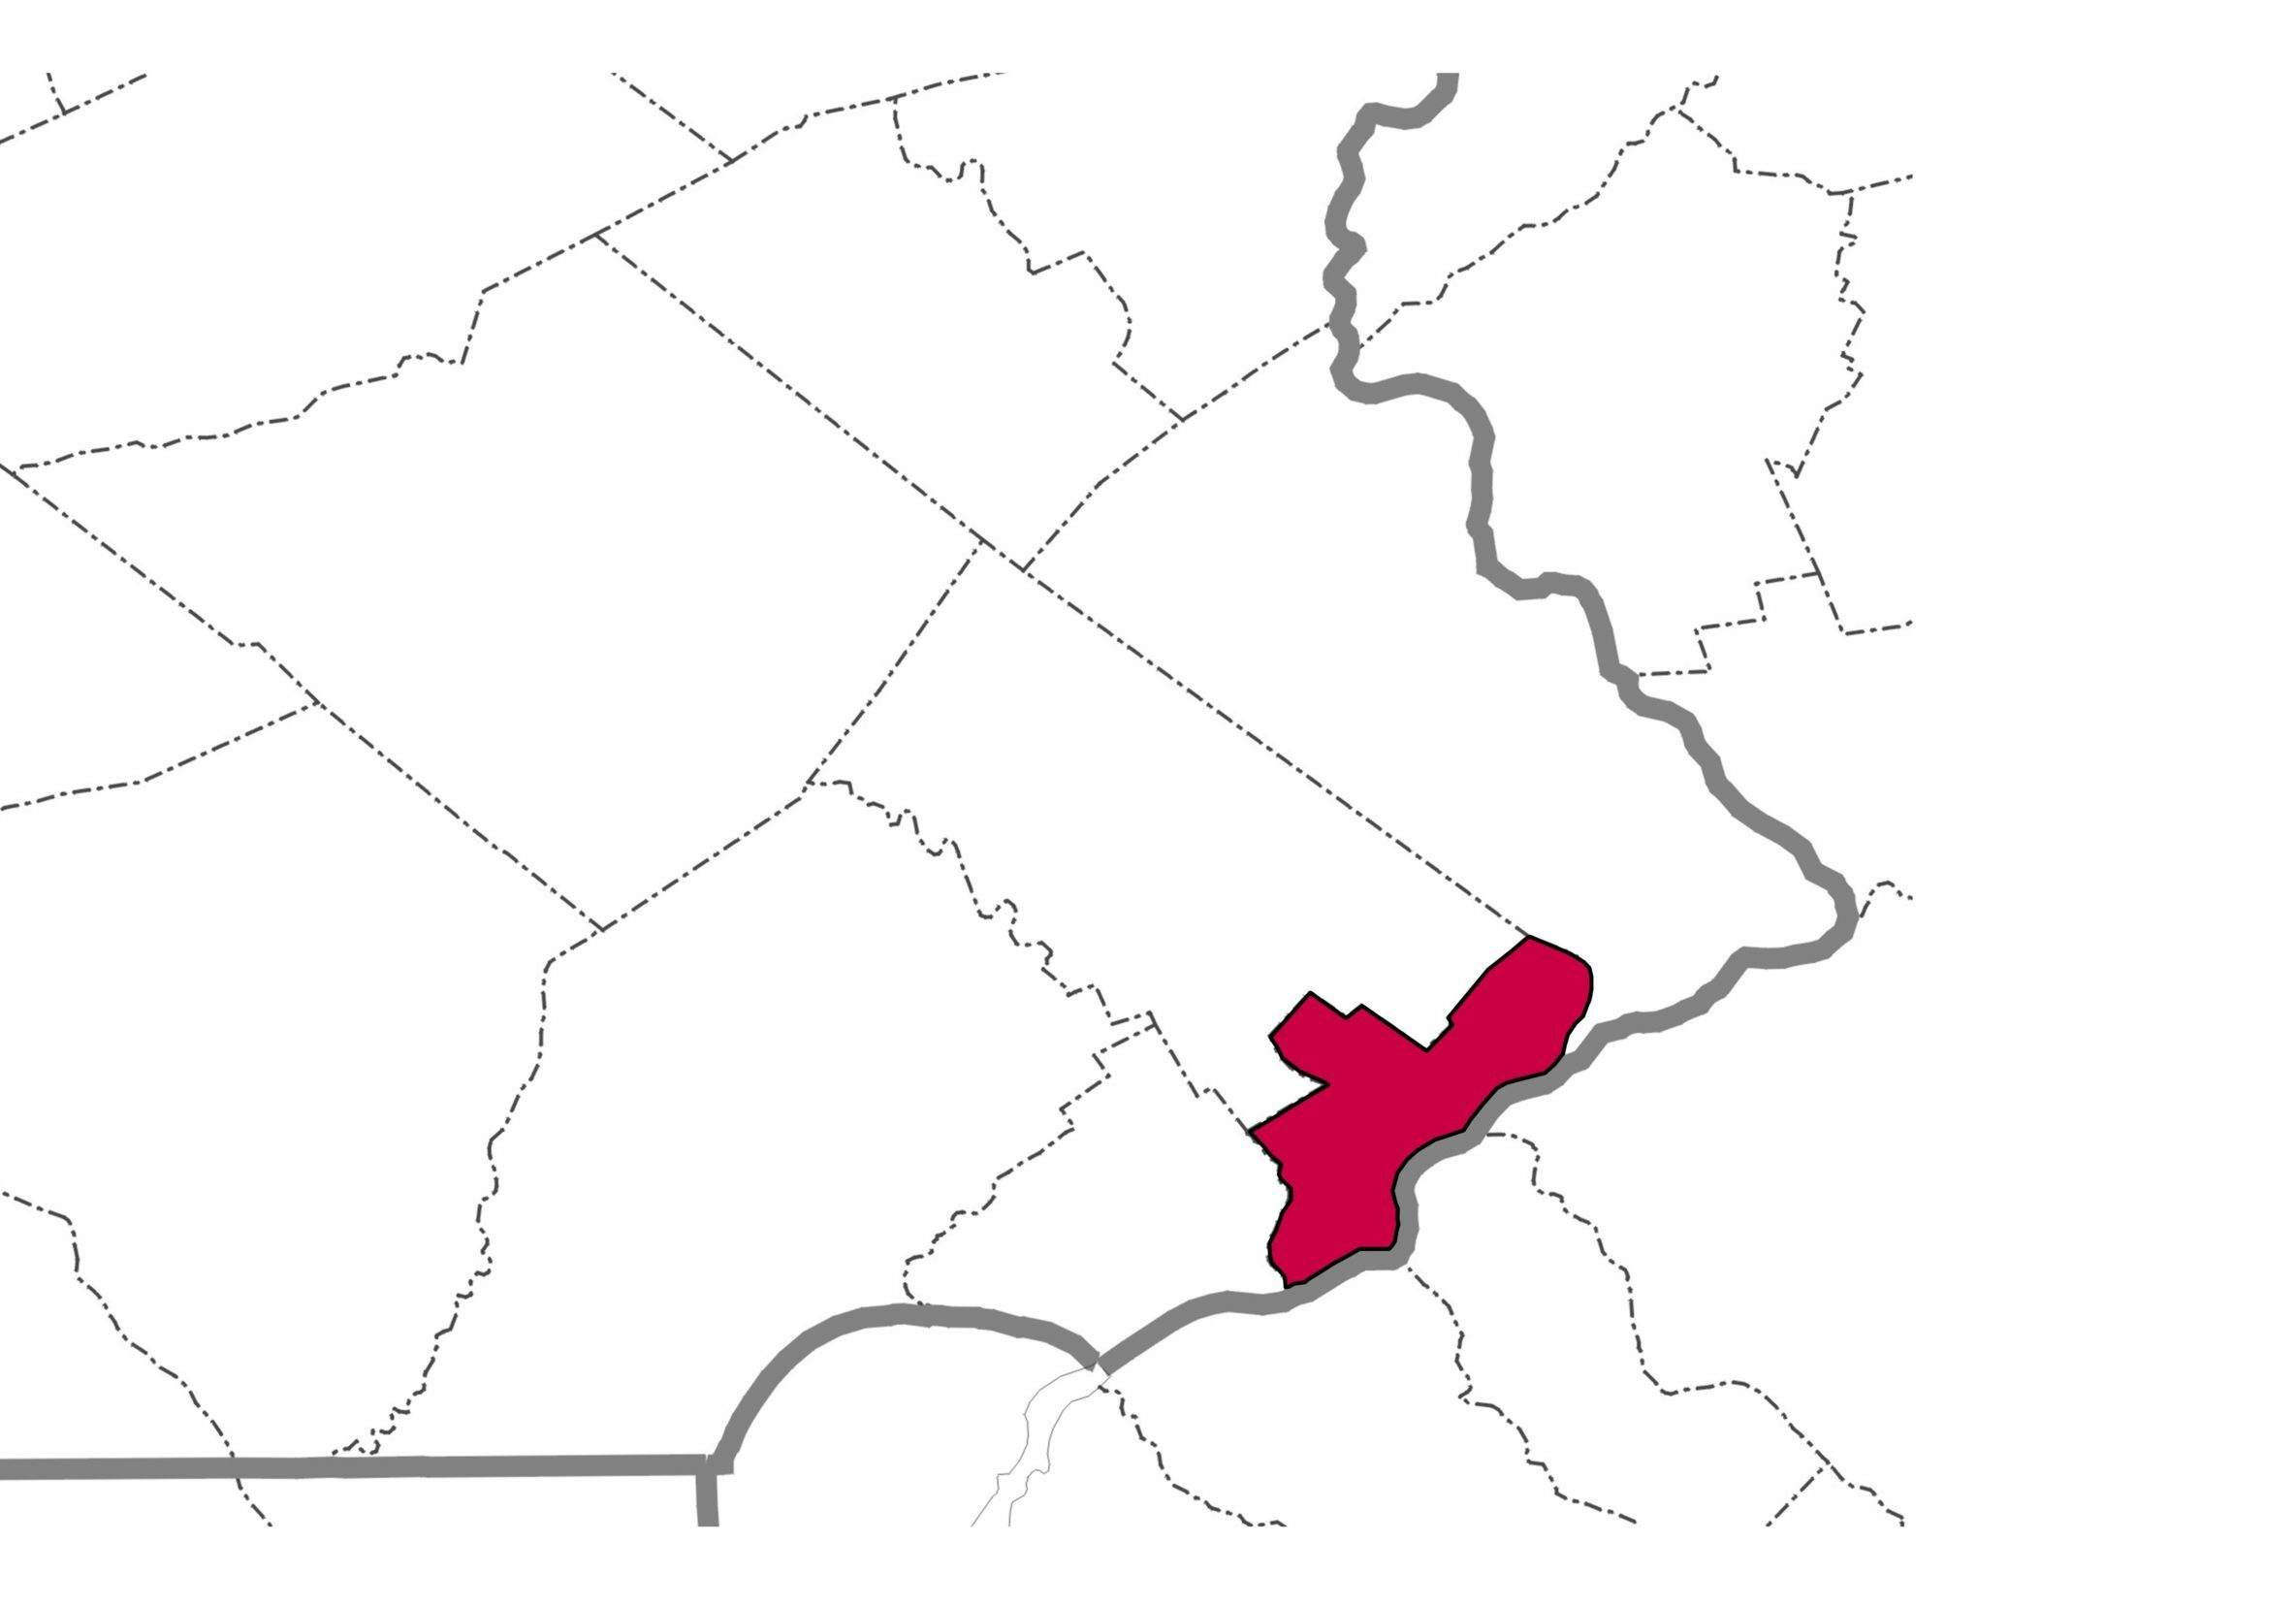 Phila County Highlighted on Local Map That Shows County Borders